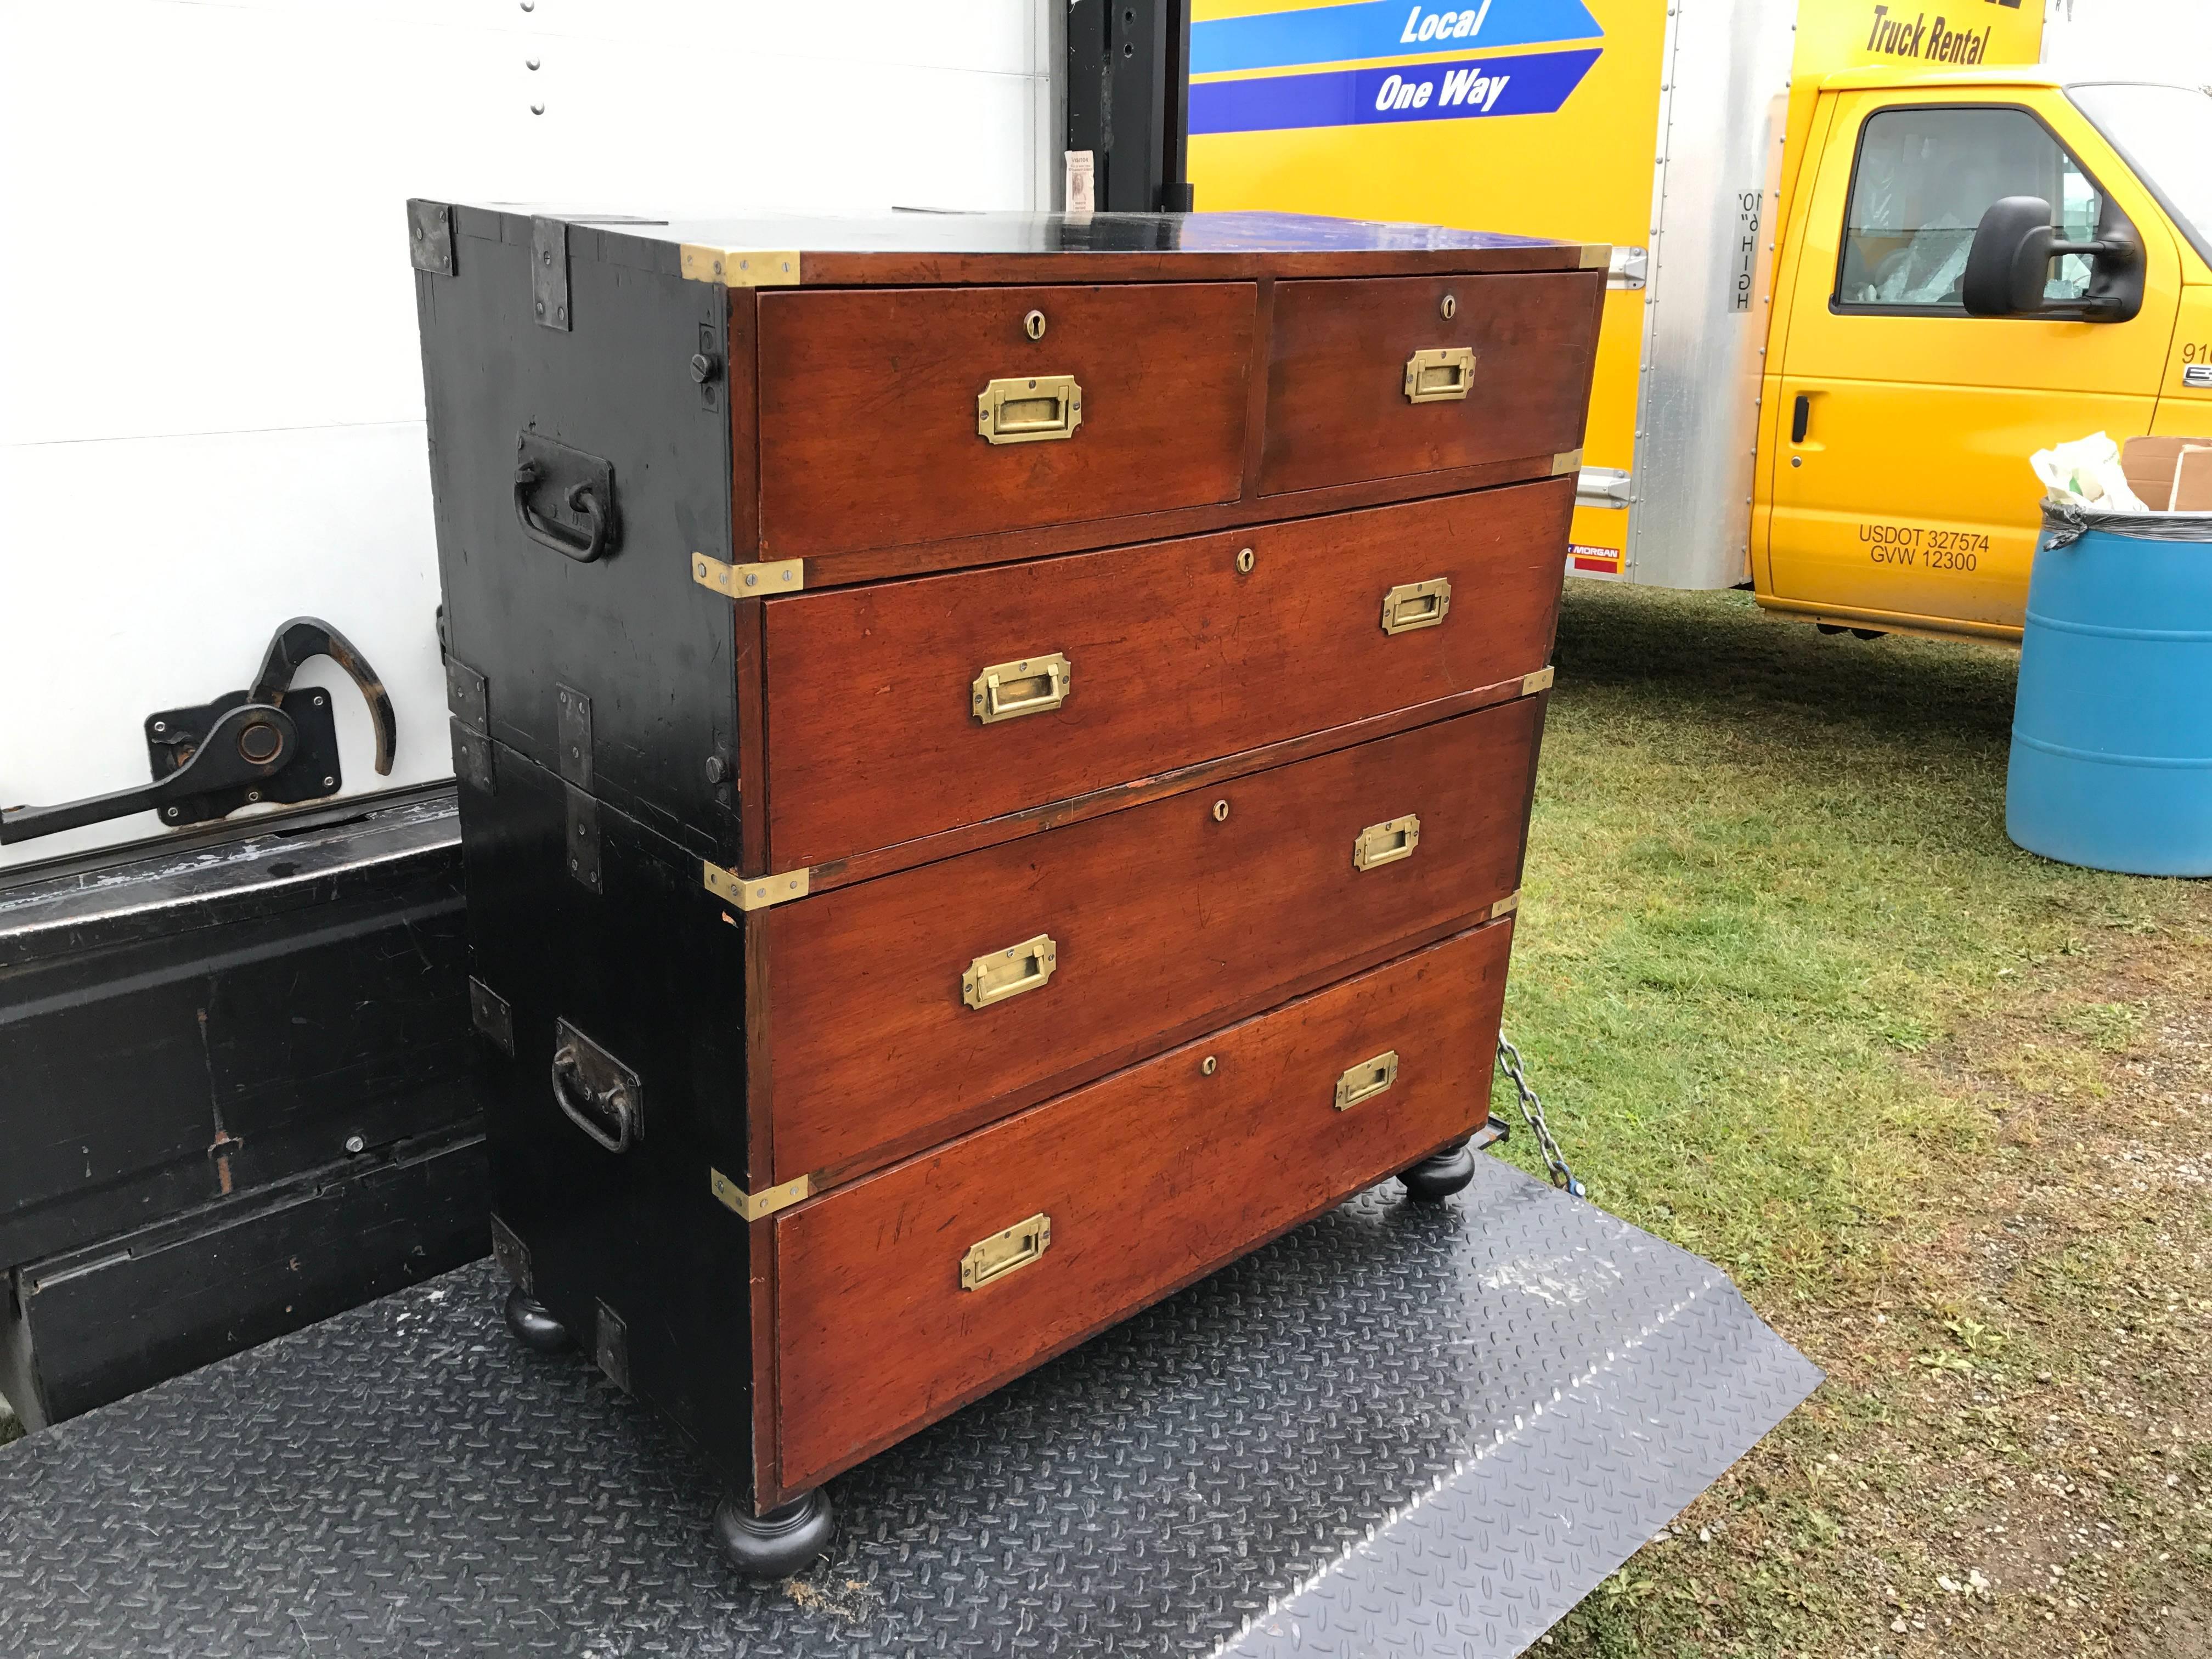 Great vintage mahogany and painted wood two-part campaign chest, the front fitted with typical flush mounted brass hardware, the top and sides fitted with unusual steel reinforcement and fittings for traveling use.
This is a true campaign chest